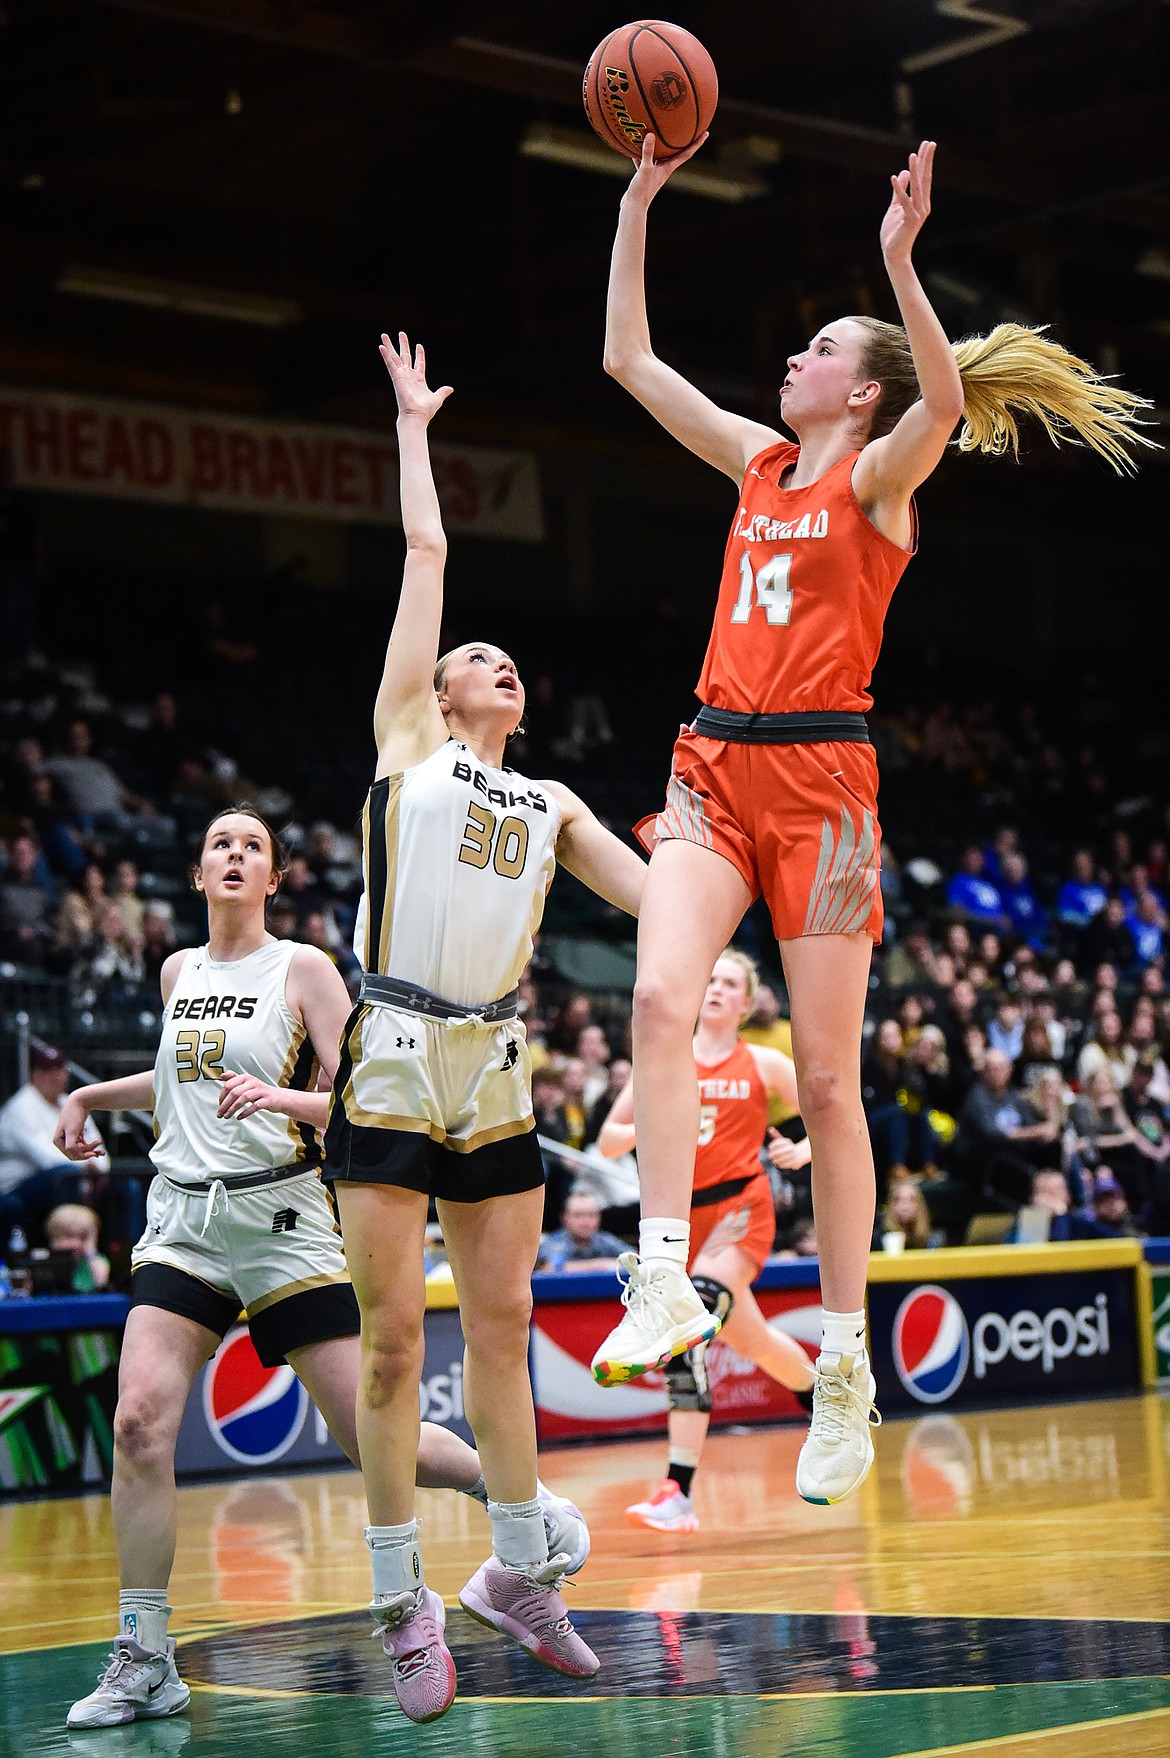 Flathead's Kennedy Moore (14) drives into the lane against Billings West's Ellie Stock (30) in the second half of the girls' Class AA state basketball championship at the Butte Civic Center on Saturday, March 11. (Casey Kreider/Daily Inter Lake)